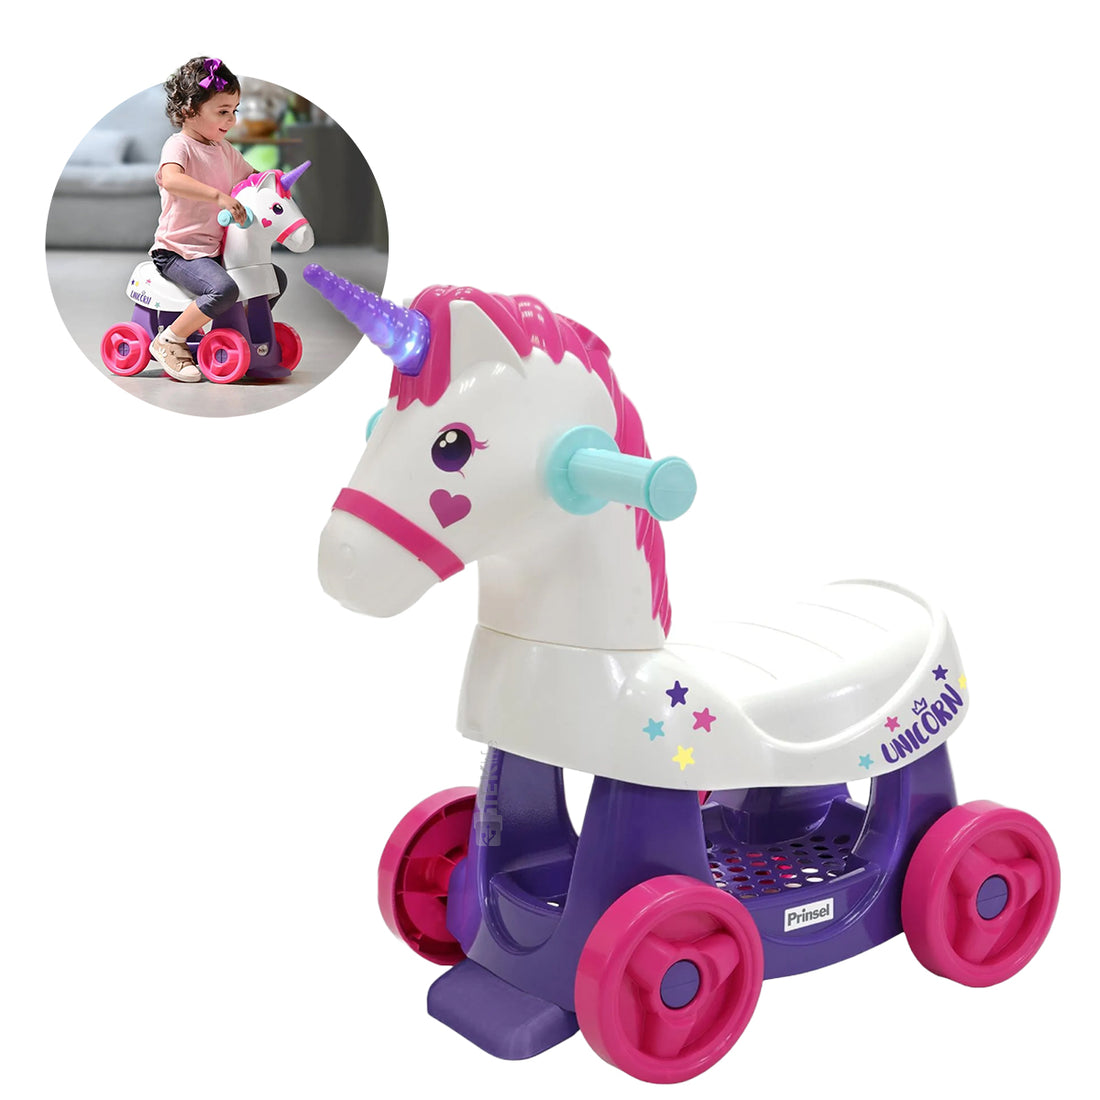 Carrito Montable Roller Prinsel